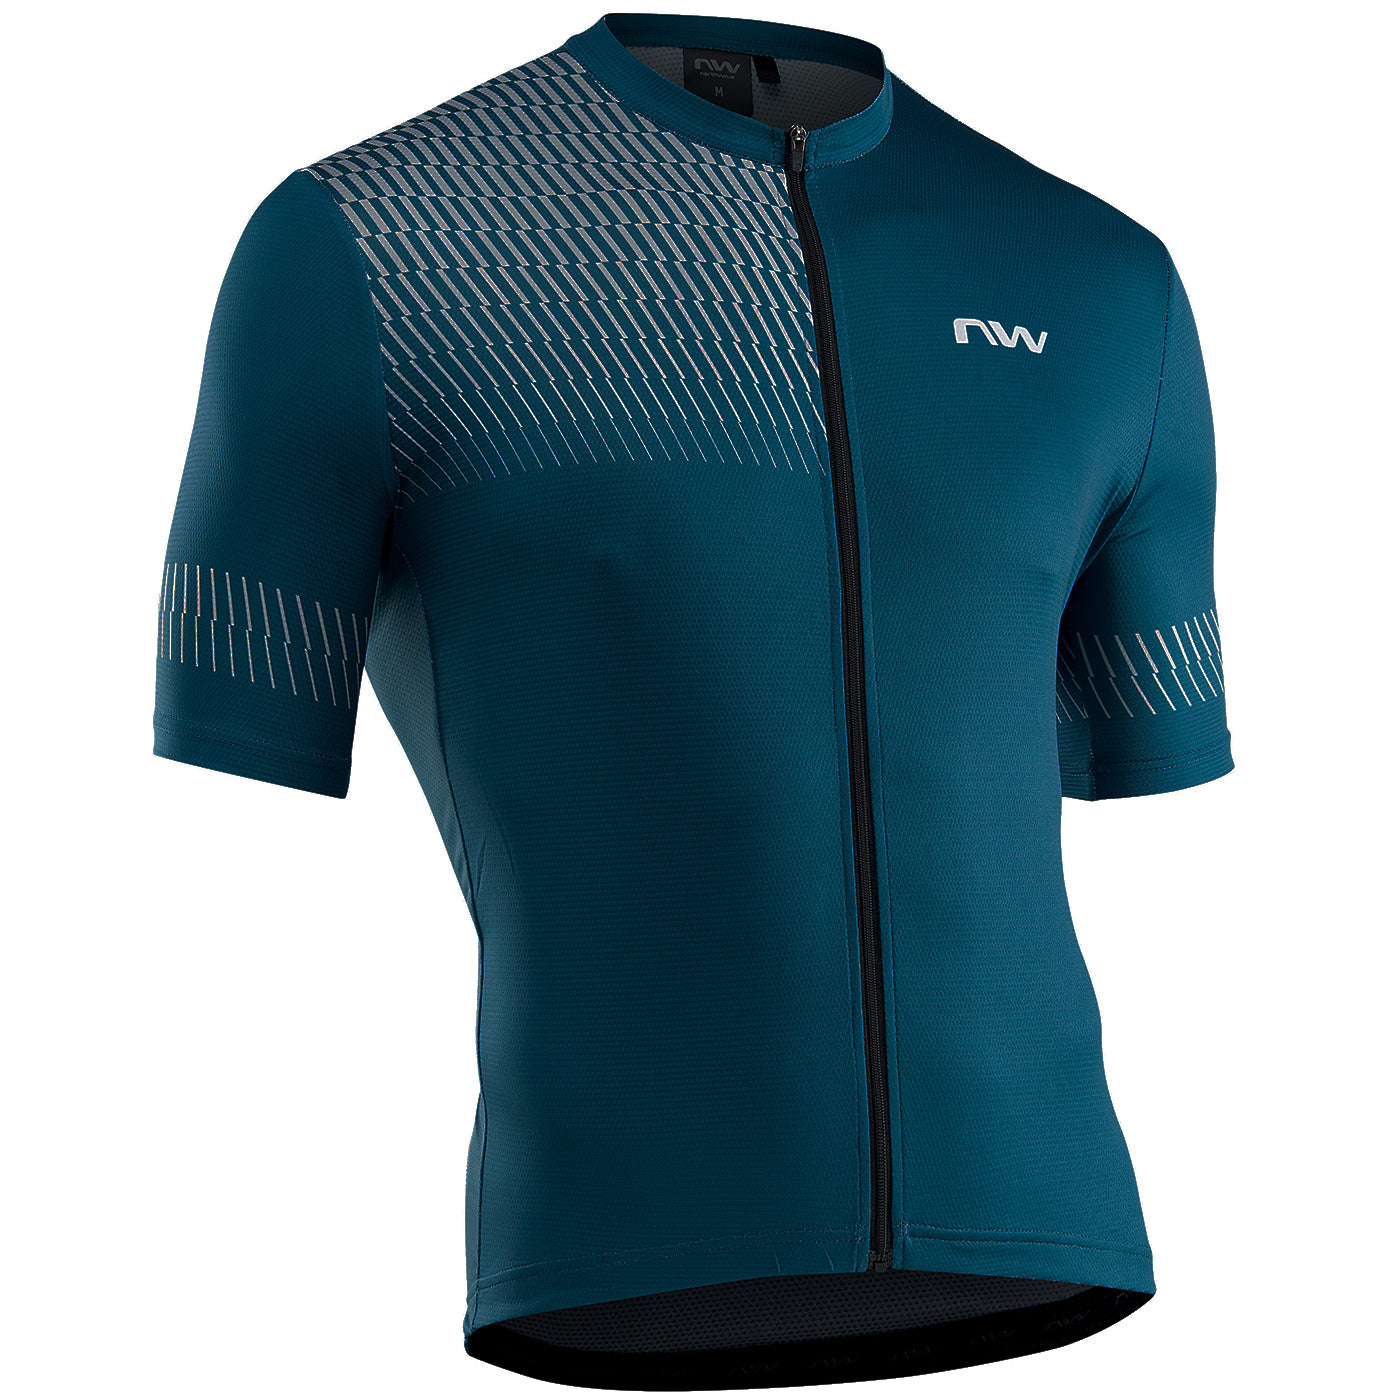 Northwave Origin jersey - Blue grey | All4cycling